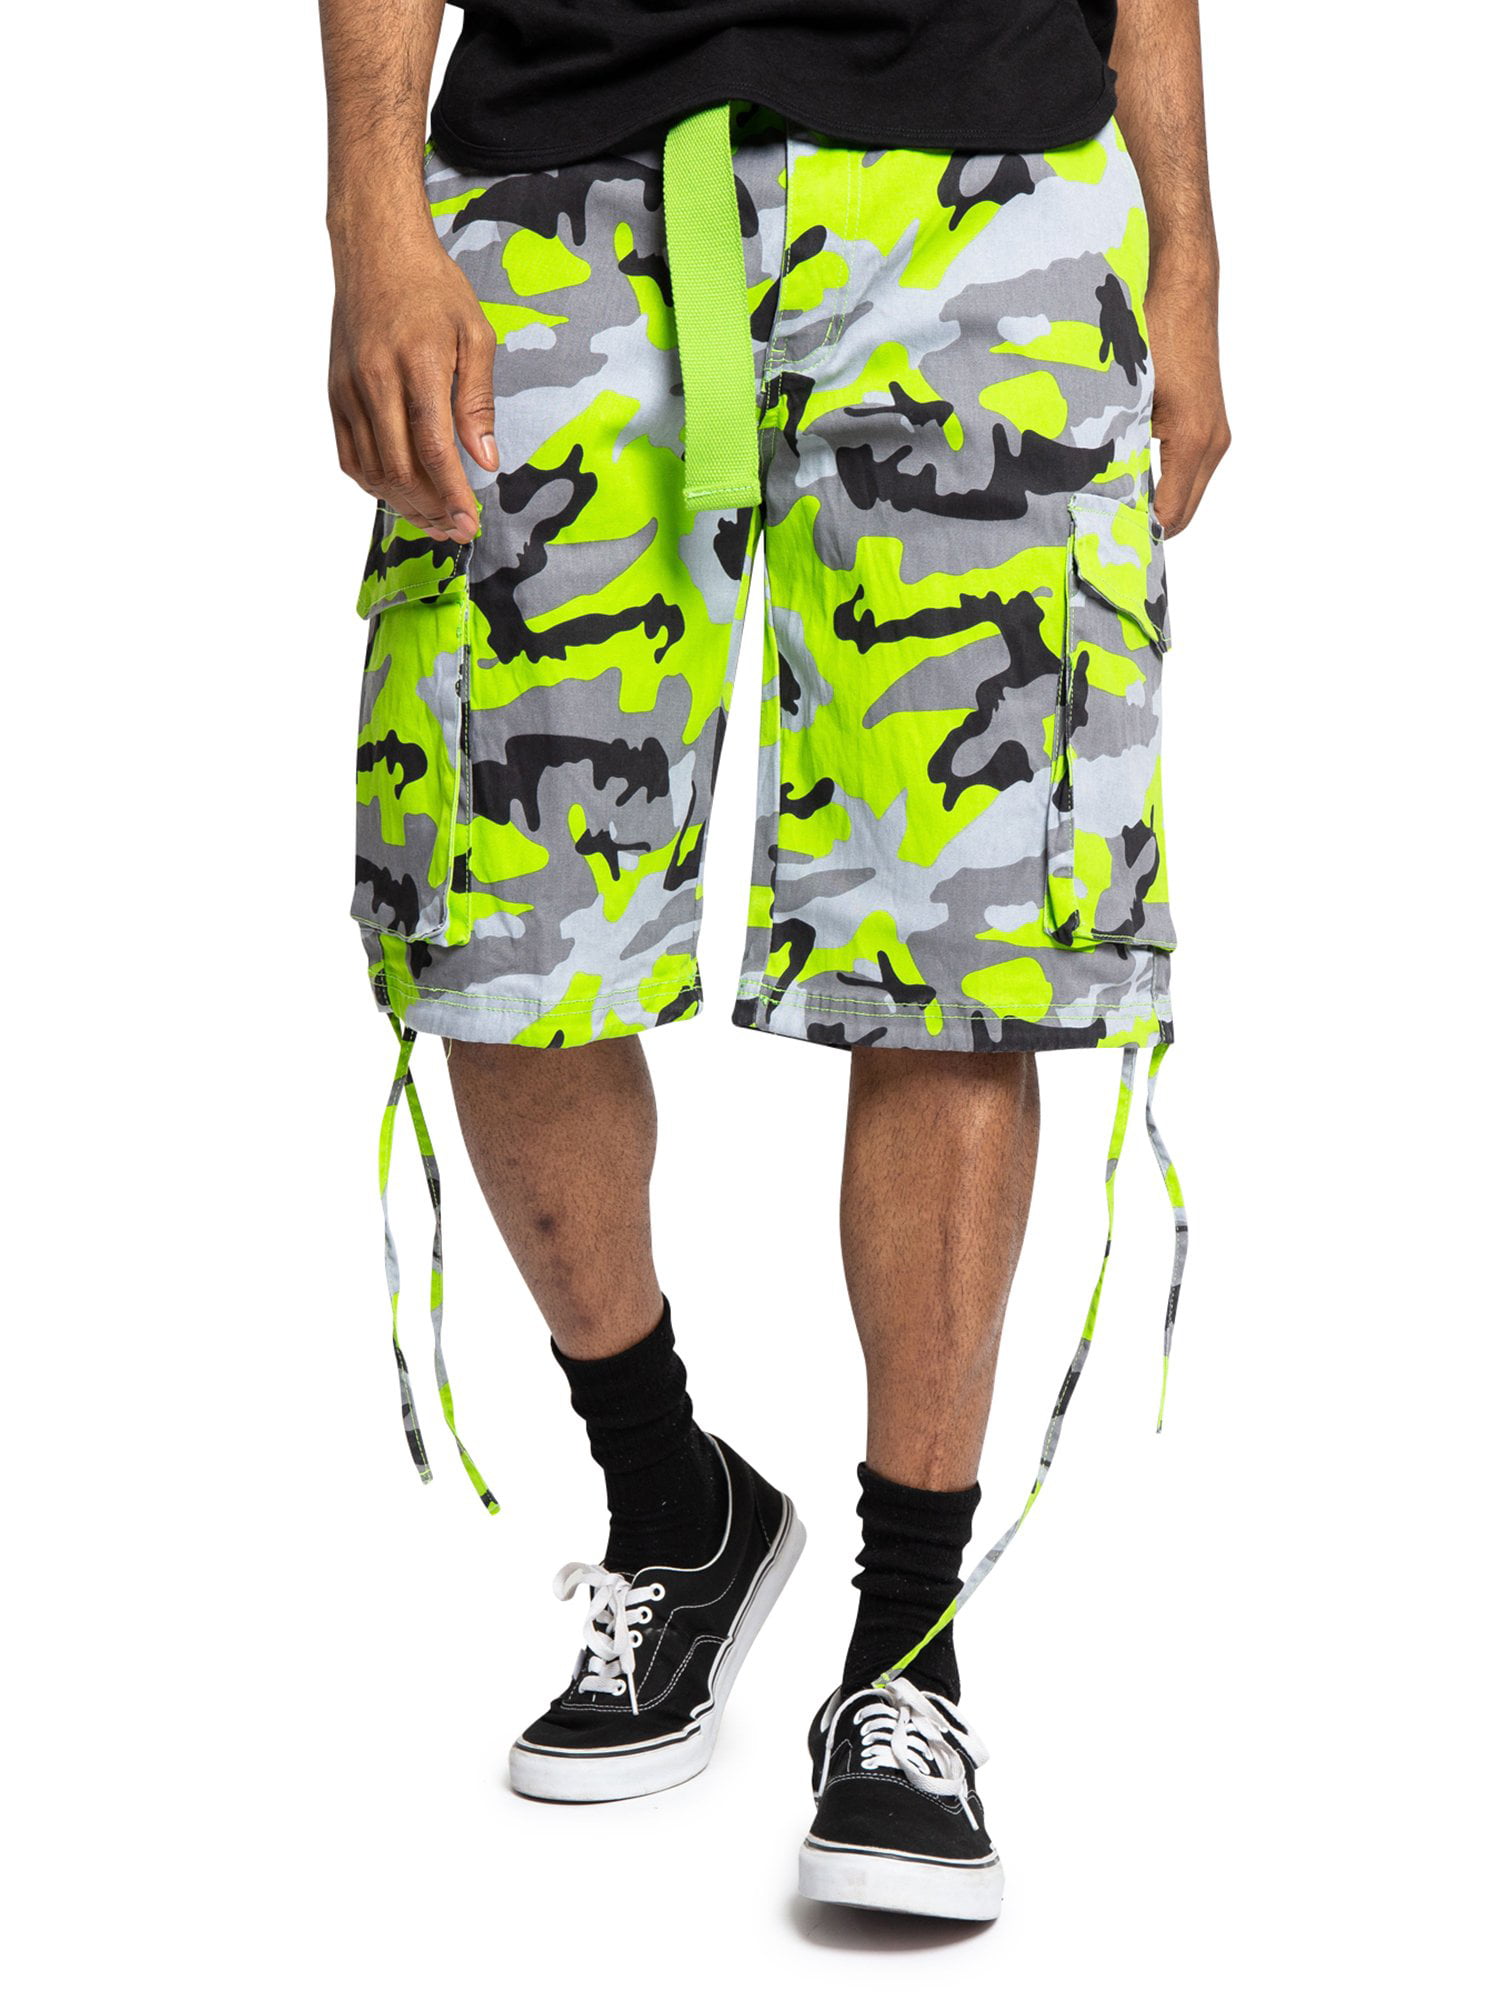 Victorious Men's Belted Twill Camo Cargo Short DS2065 - Lime - 30